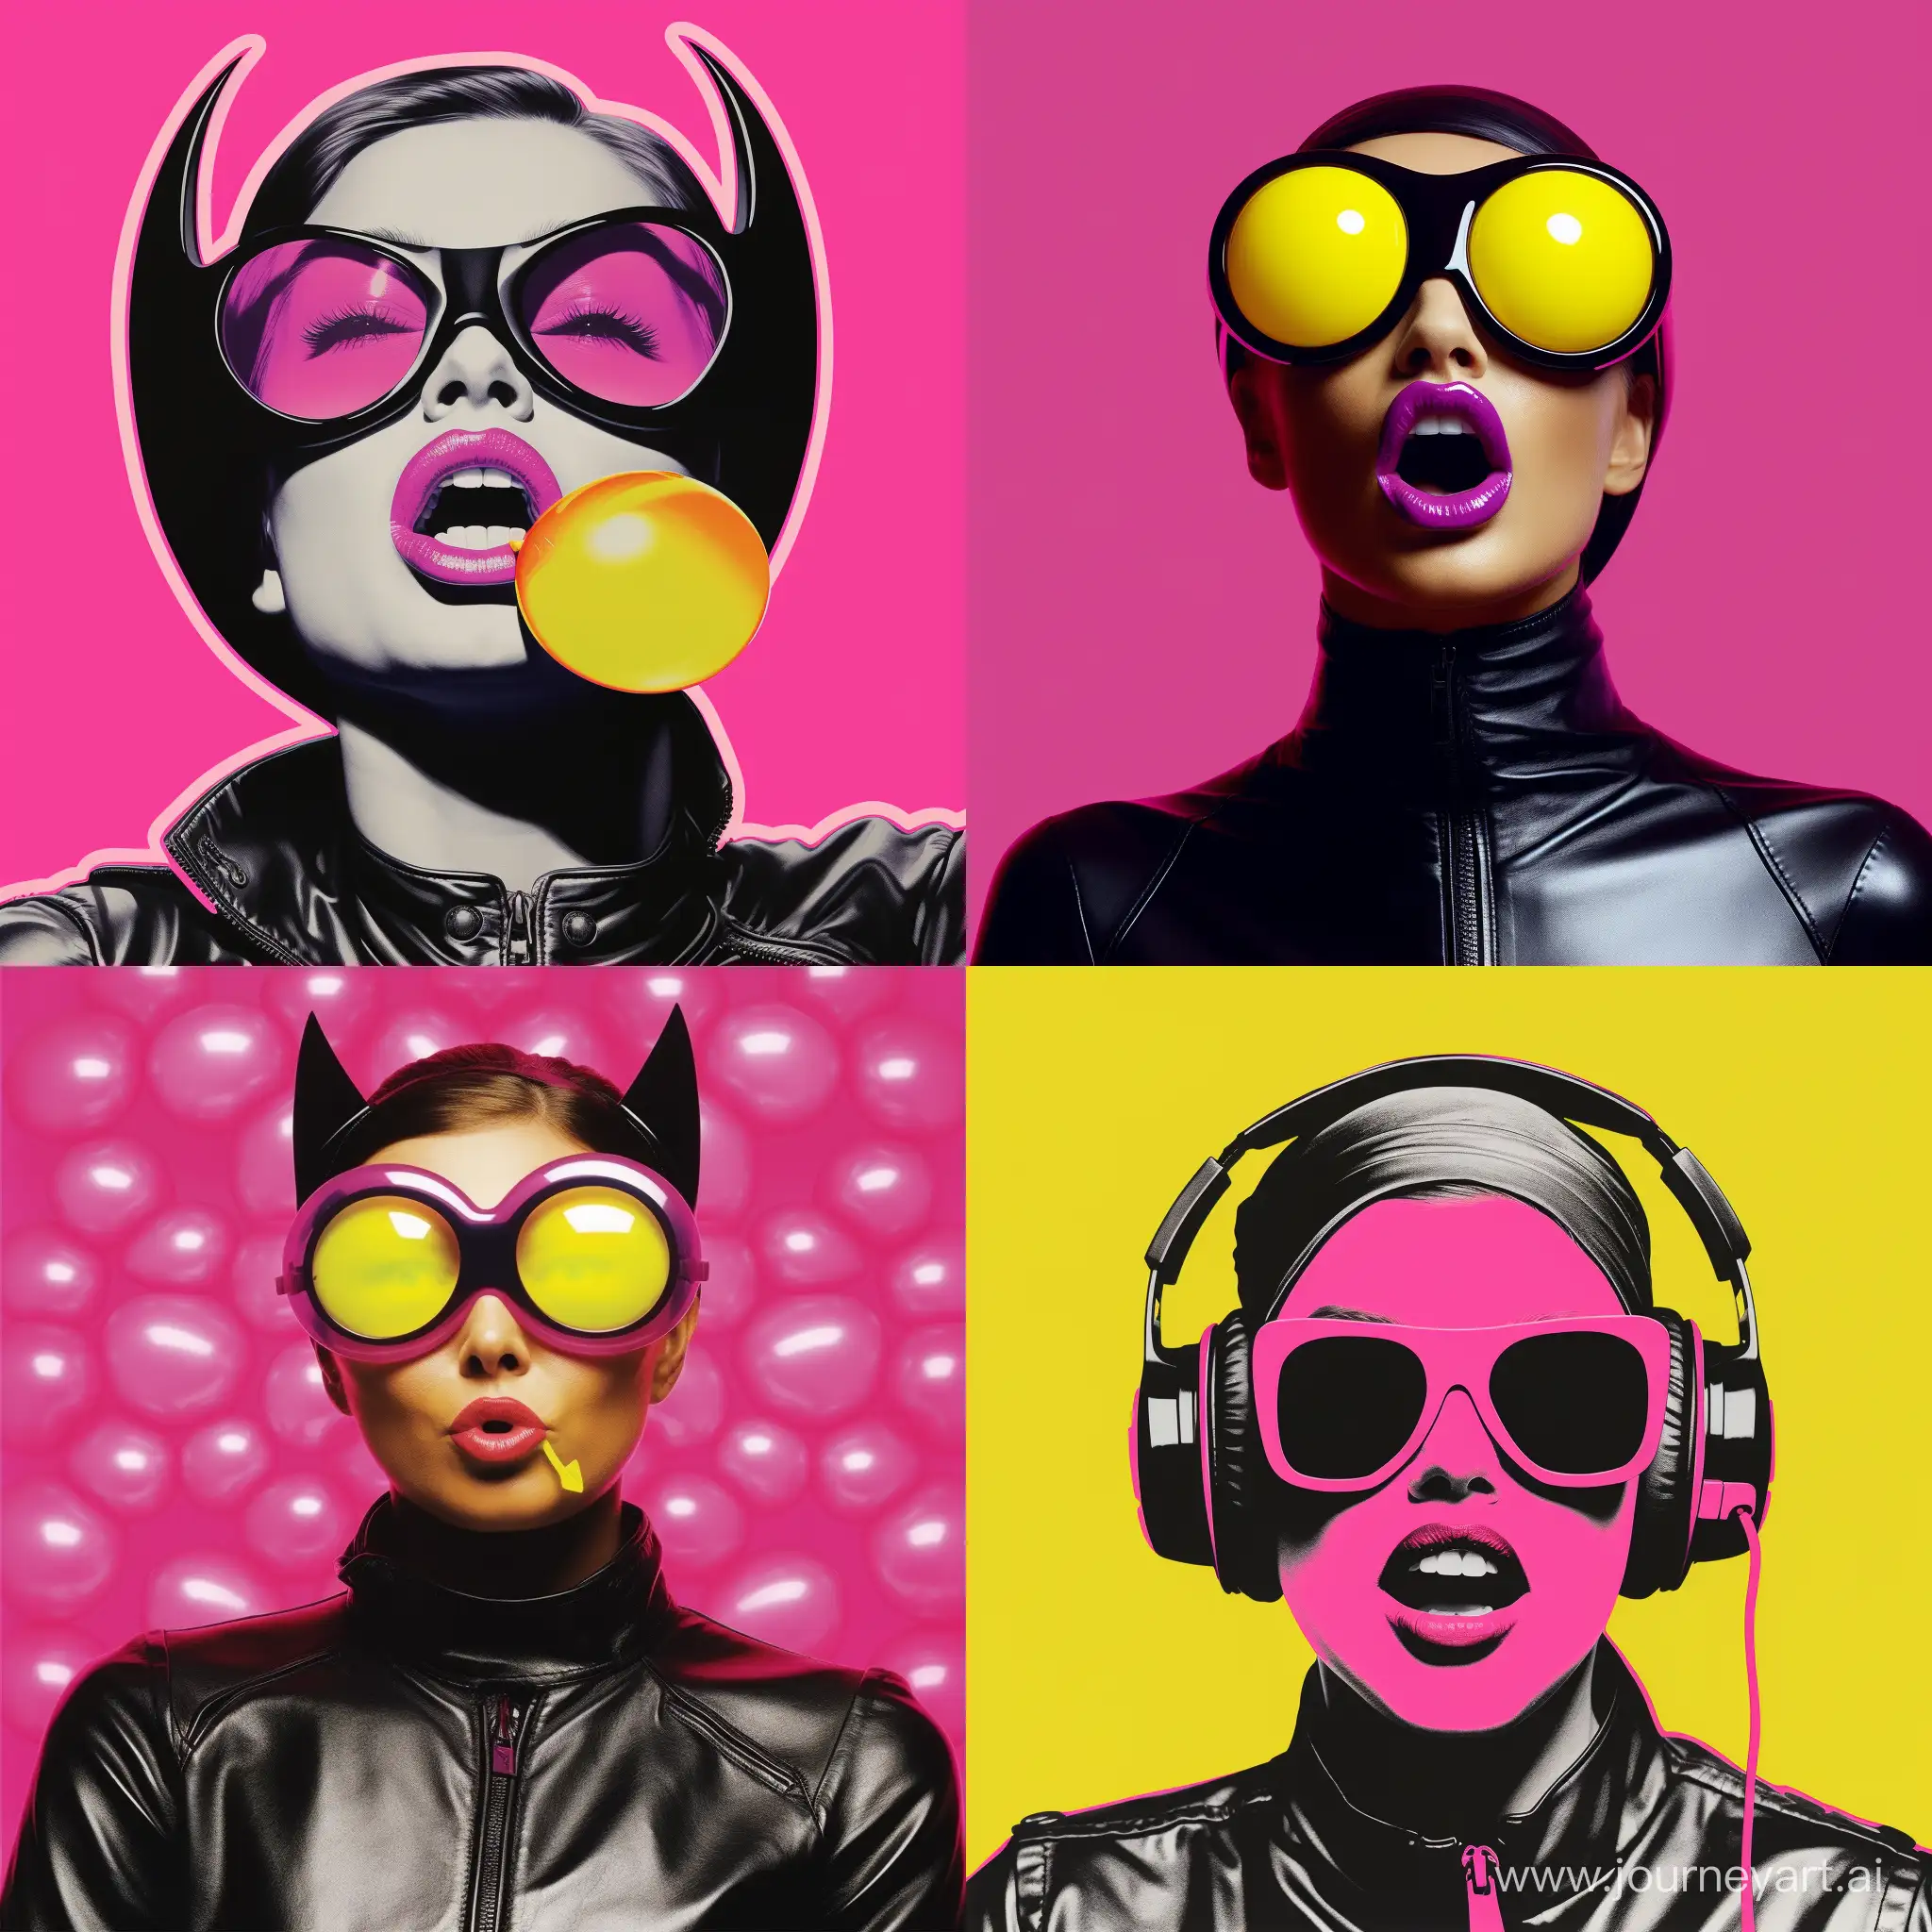 in the style of Anthony Burrill, portrait of a Catwoman blowing bubble gum, wearing neon goggles